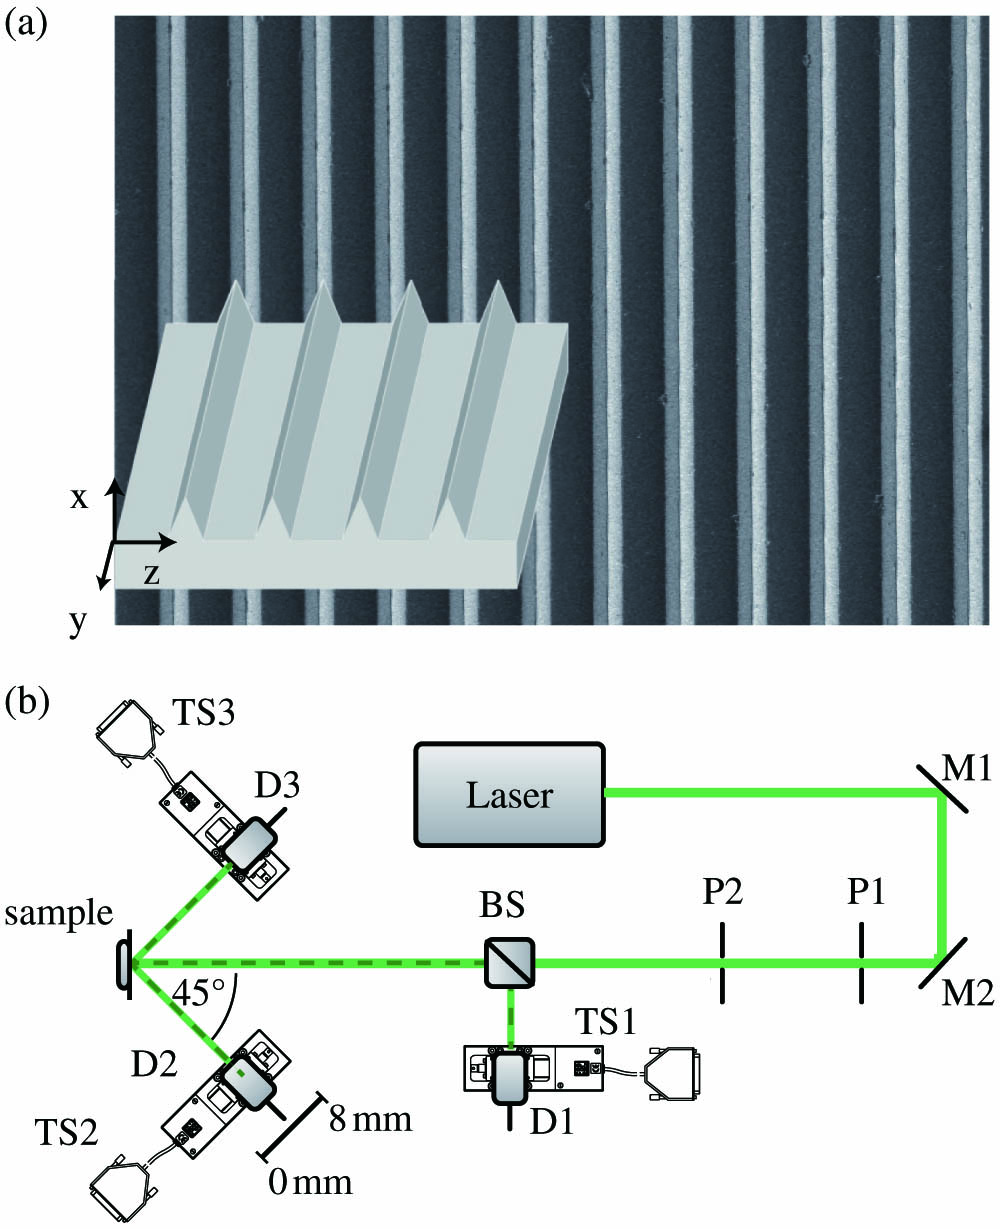 (a) Scanning electron microscope (SEM) image and schematic, three-dimensional representation of the riblet structure under study. (b) Scheme of the optical setup of the riblet sensor described in Refs. [8,9]: the laser beam is incident normal to the riblet sample’s surface, and the intensity distribution of the scattered light is detected in the 0° and ±45° directions. Degradation of the riblet structure is measured as a decrease in intensity around 45°. D1–D3, Si-PIN-diodes; BS, beam-splitter; M1, M2, mirrors; TS1–TS3, motorized translation stages.